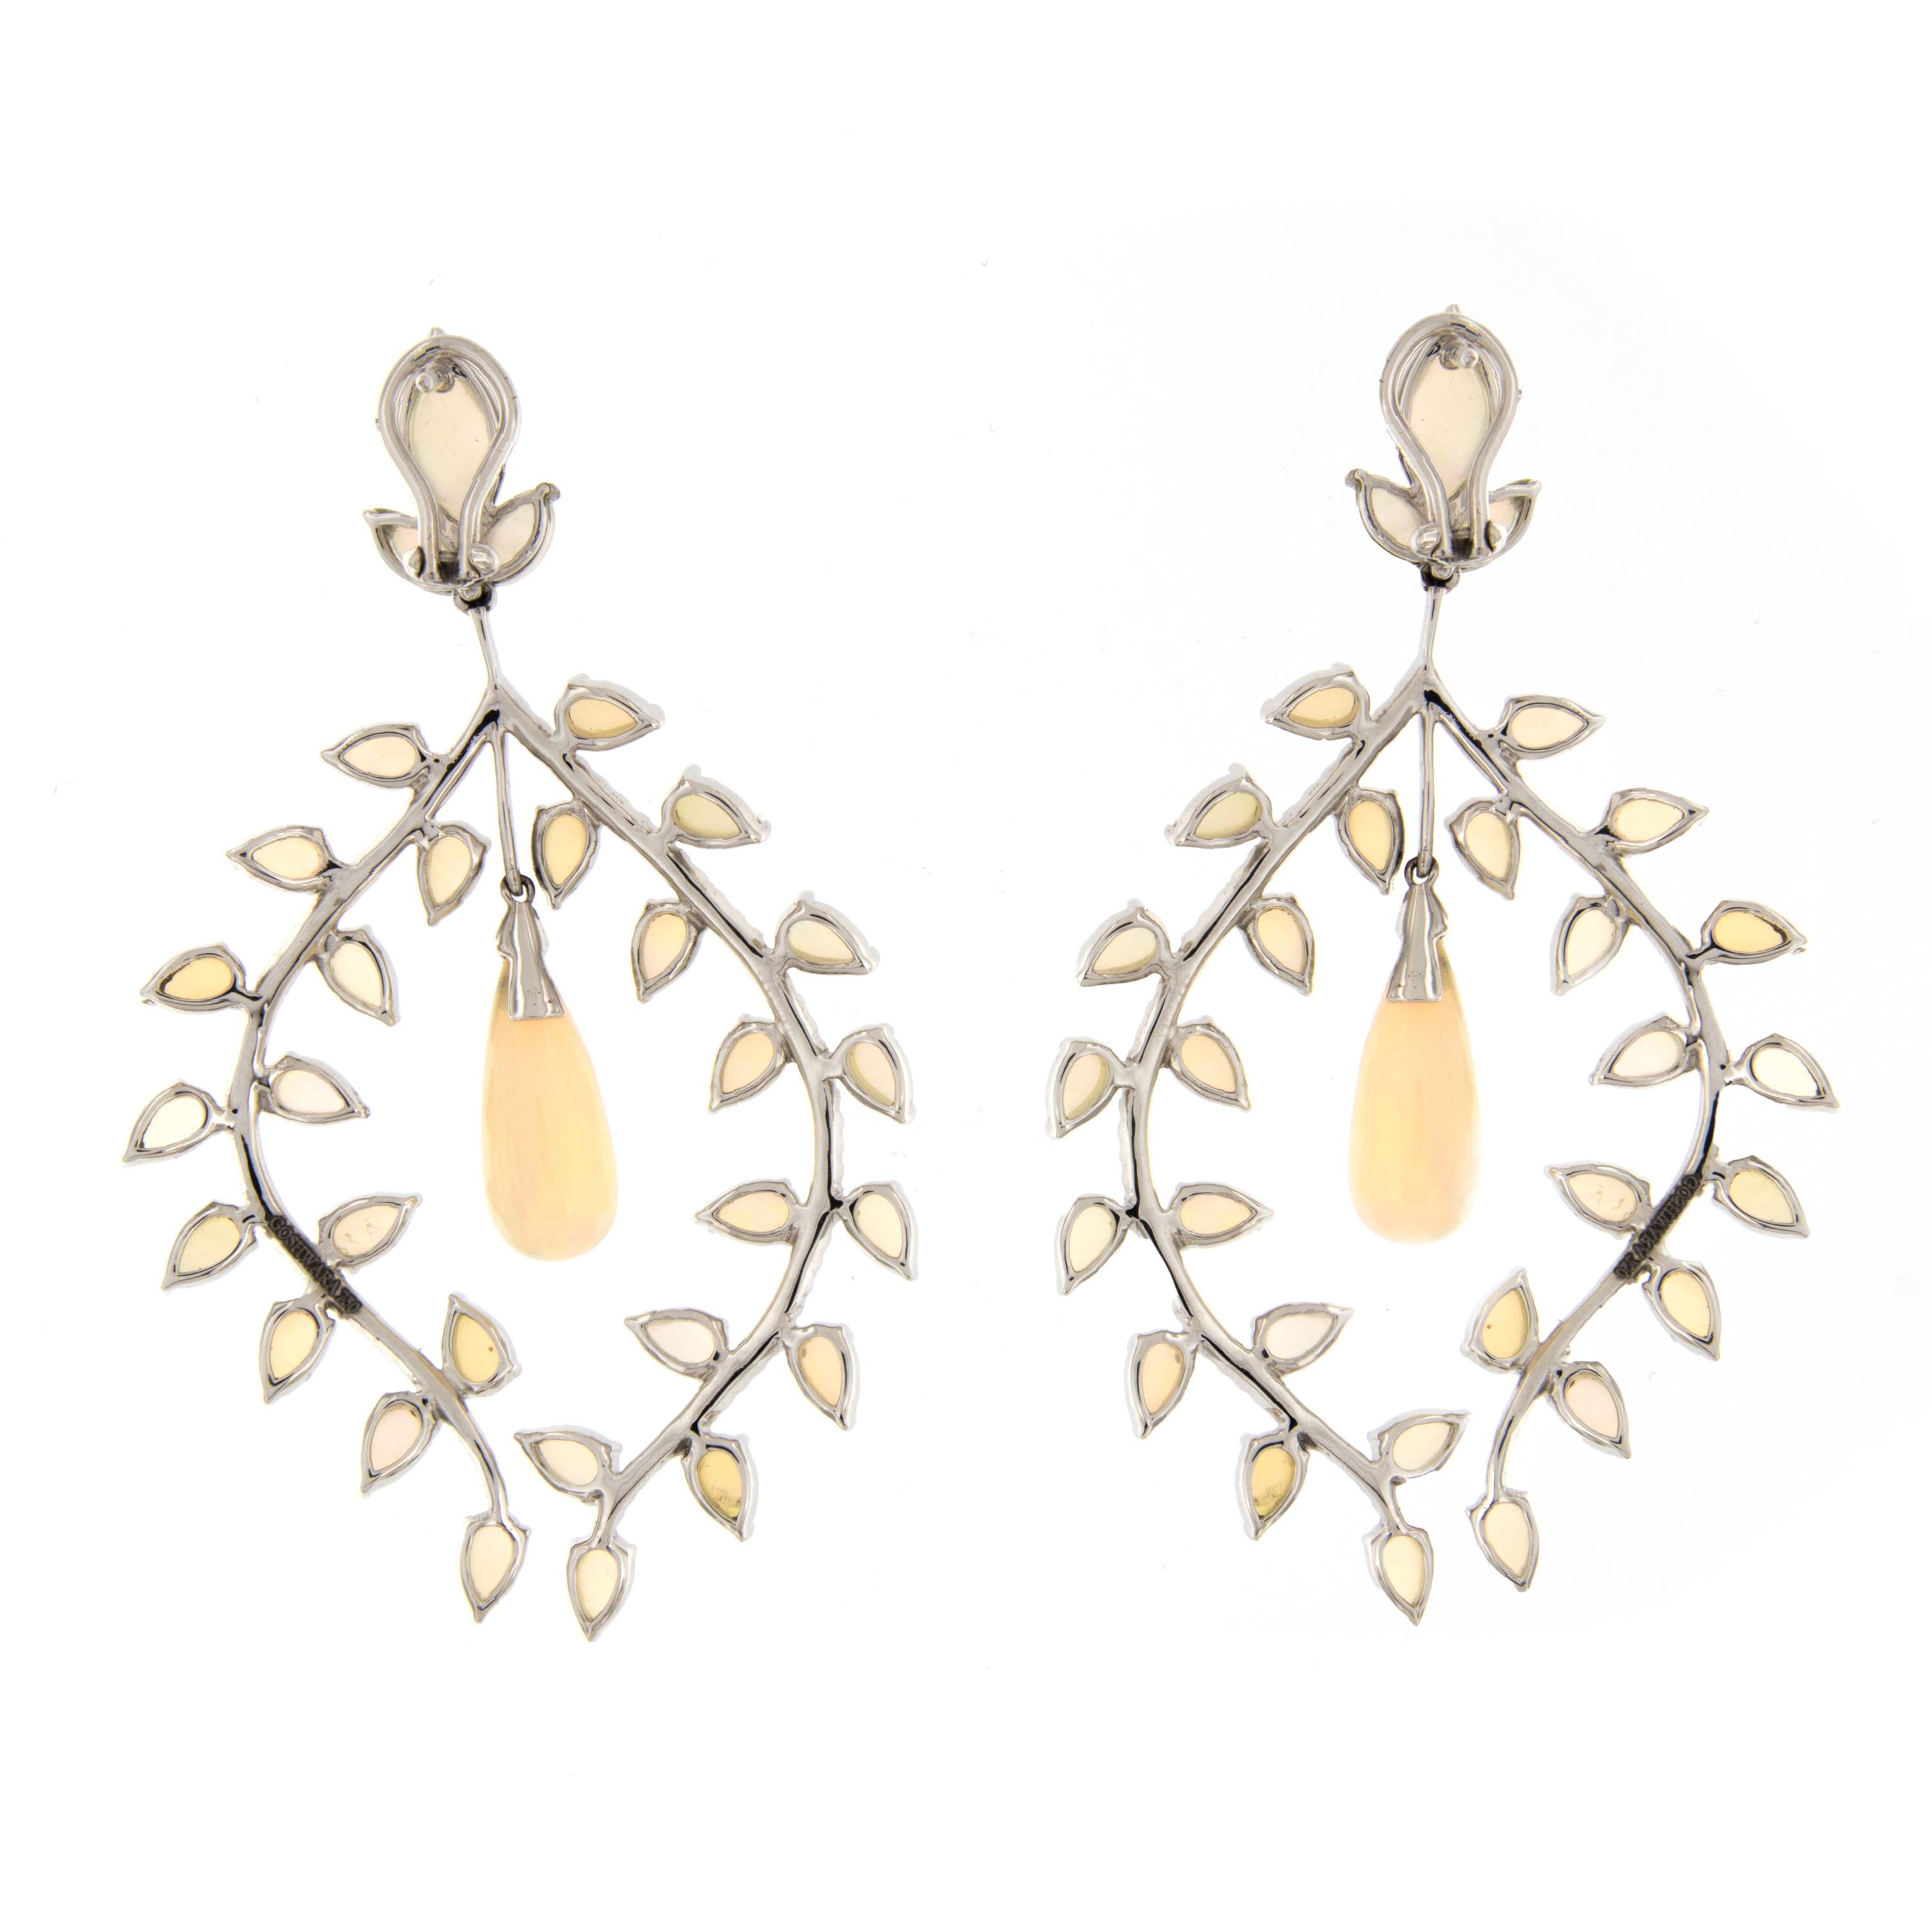 “G-One” opal and diamond chandelier earrings are truly a one of a kind piece of art, set with artistry and elegance in 18k white gold. Designed by Goshwara of New York. 2.7 inches long and 2.48 inches wide. Weigh 14 grams. Marked Goshwara.

Opal